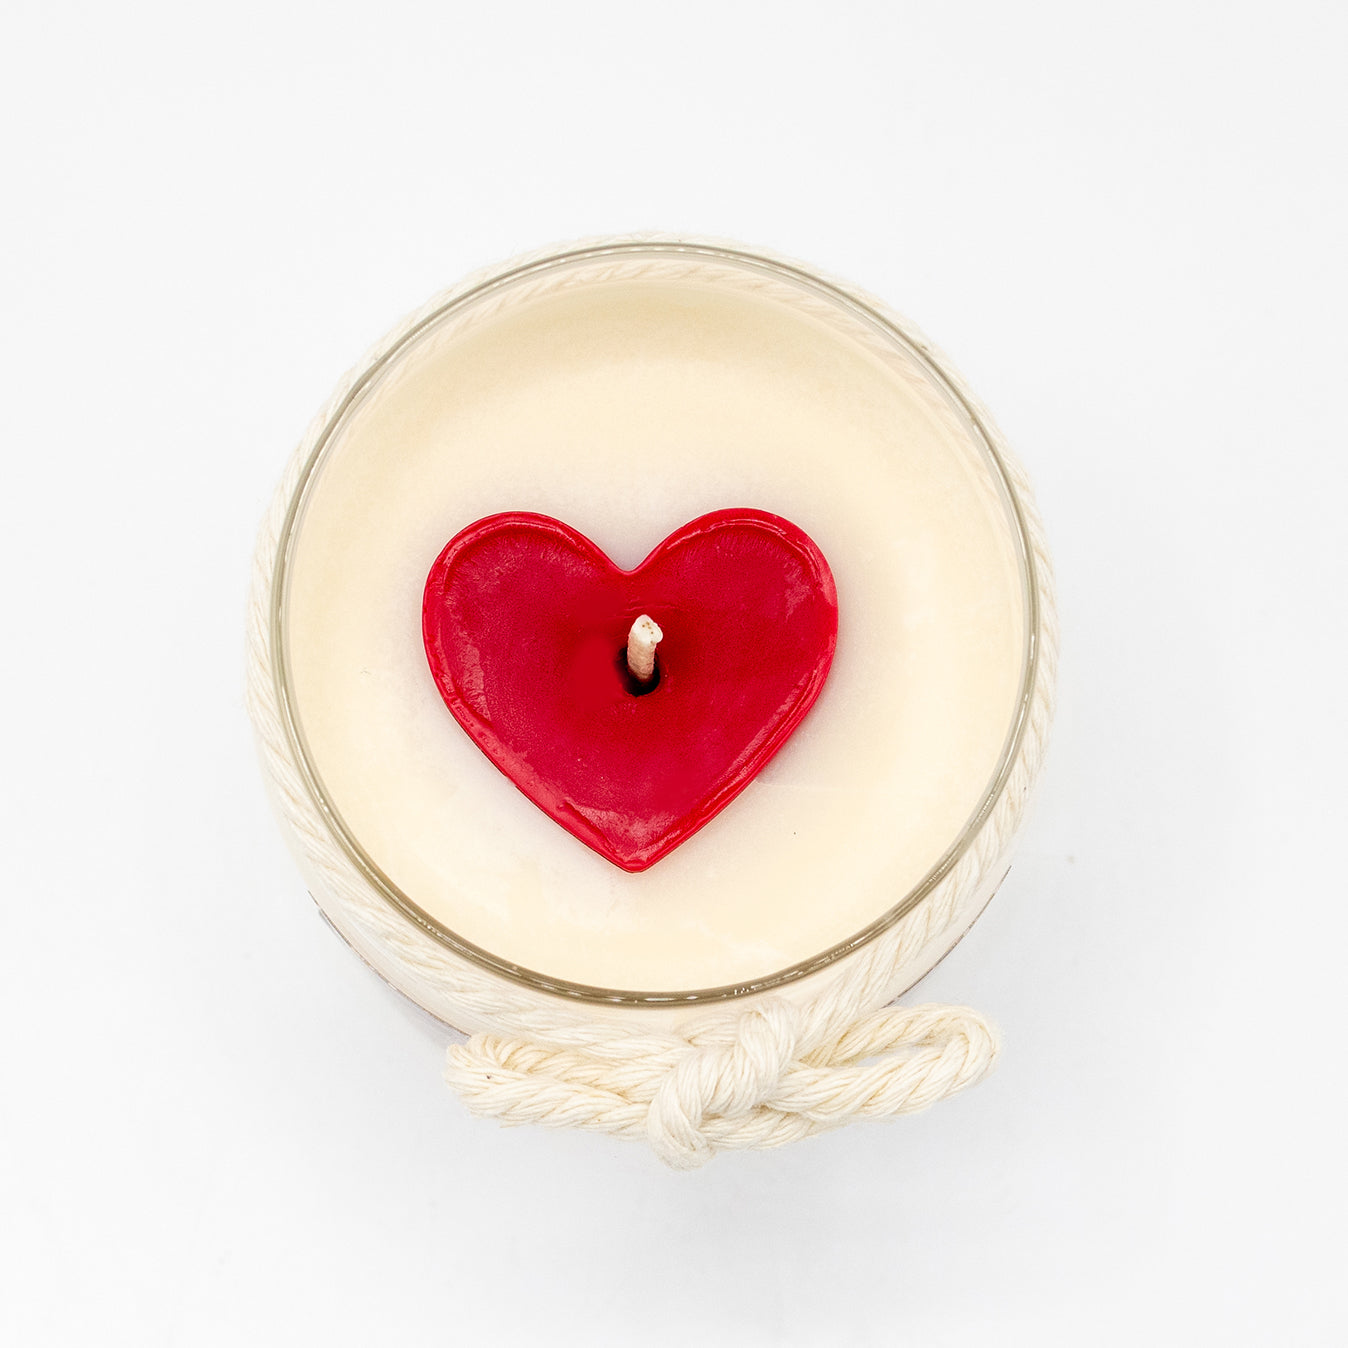 Valentine's Day Collection - Love Spell Soy Wax Candle